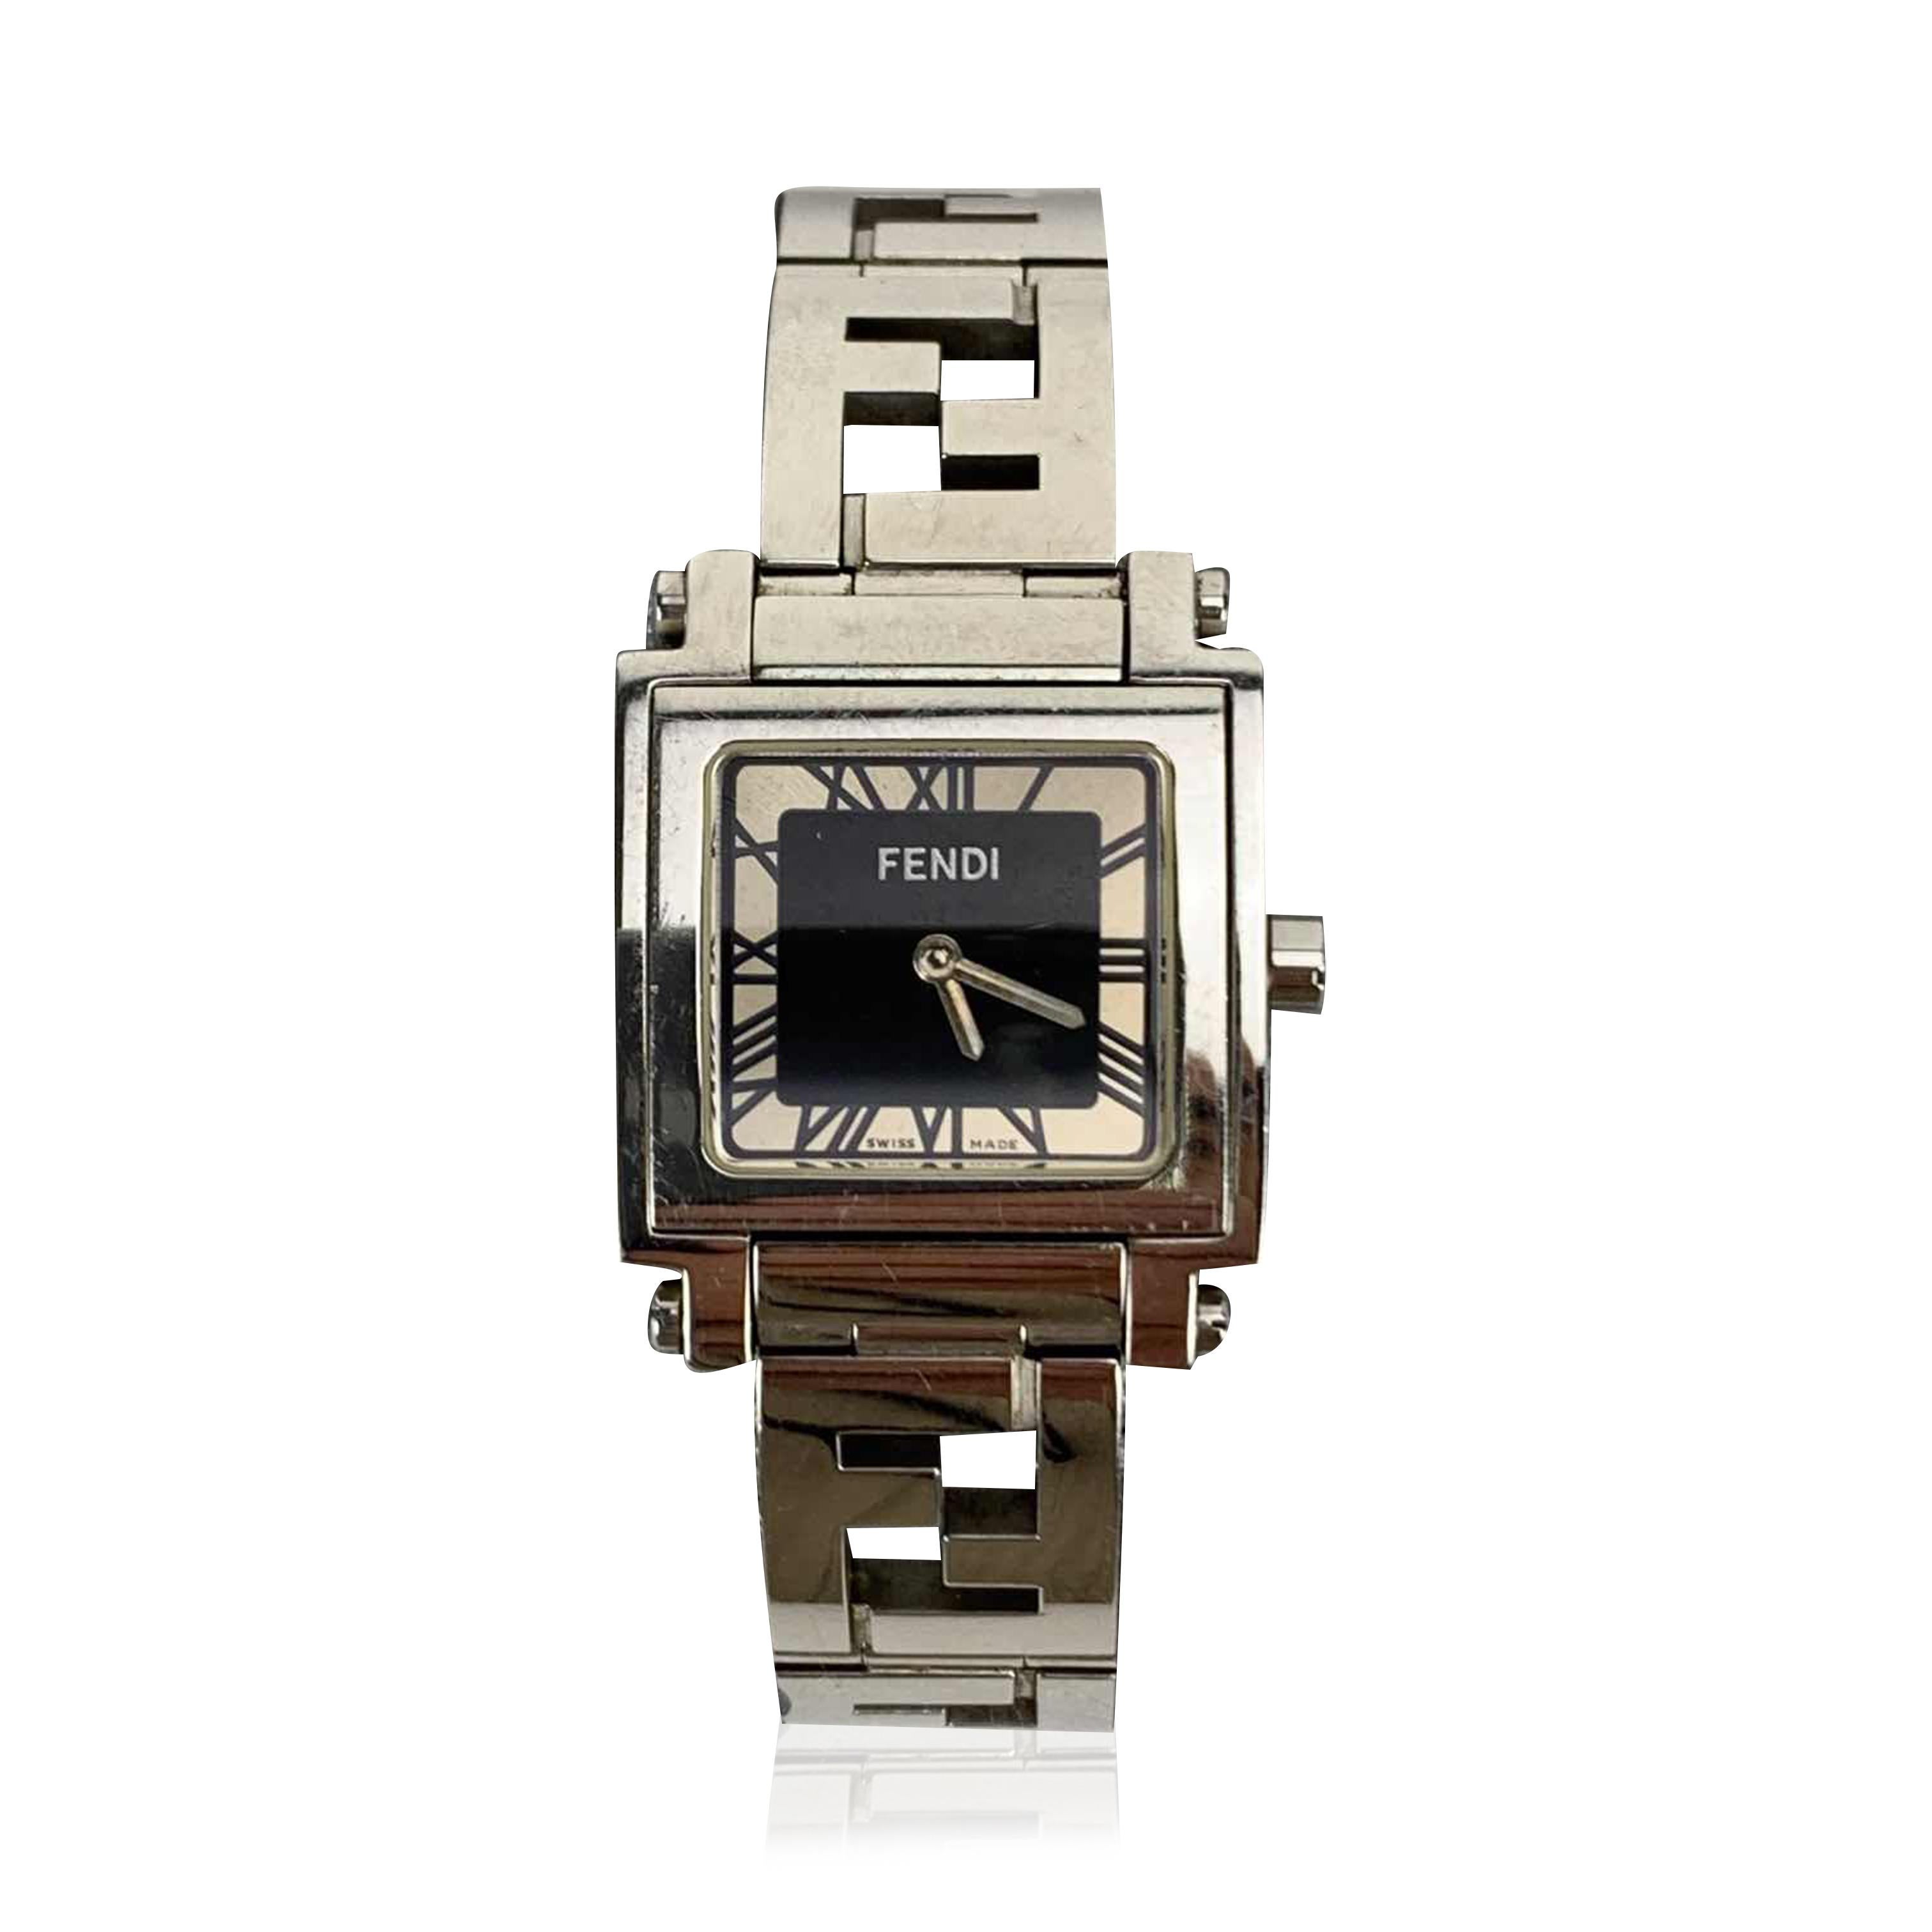 Fendi silver-tone stainless steel watch, Mod. 6000 L. Square stainless steel case. Black dial with roman numbers and two hands. Sapphire crystal. Swiss Made Quartz movement. Fendi written on face. Silver-tone wrist strap with FF logos. .Deployant